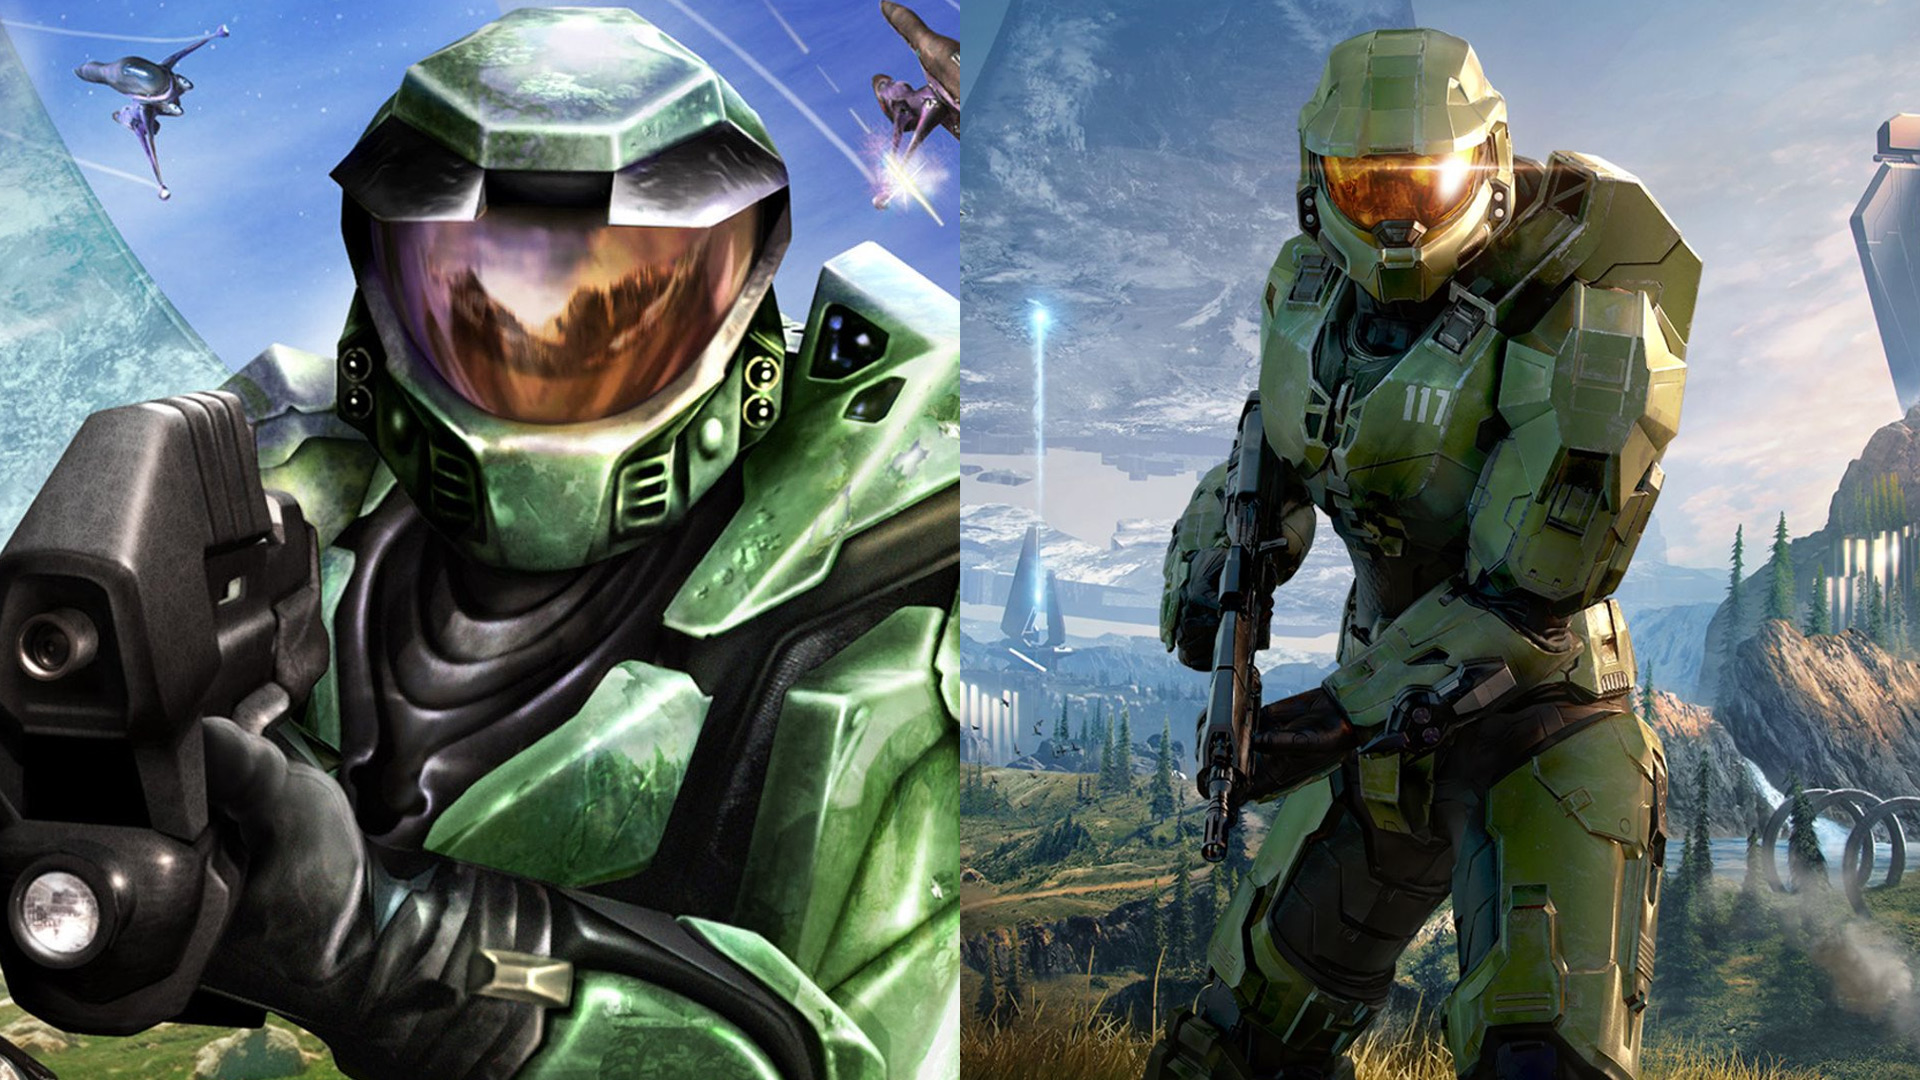 Halo games in order